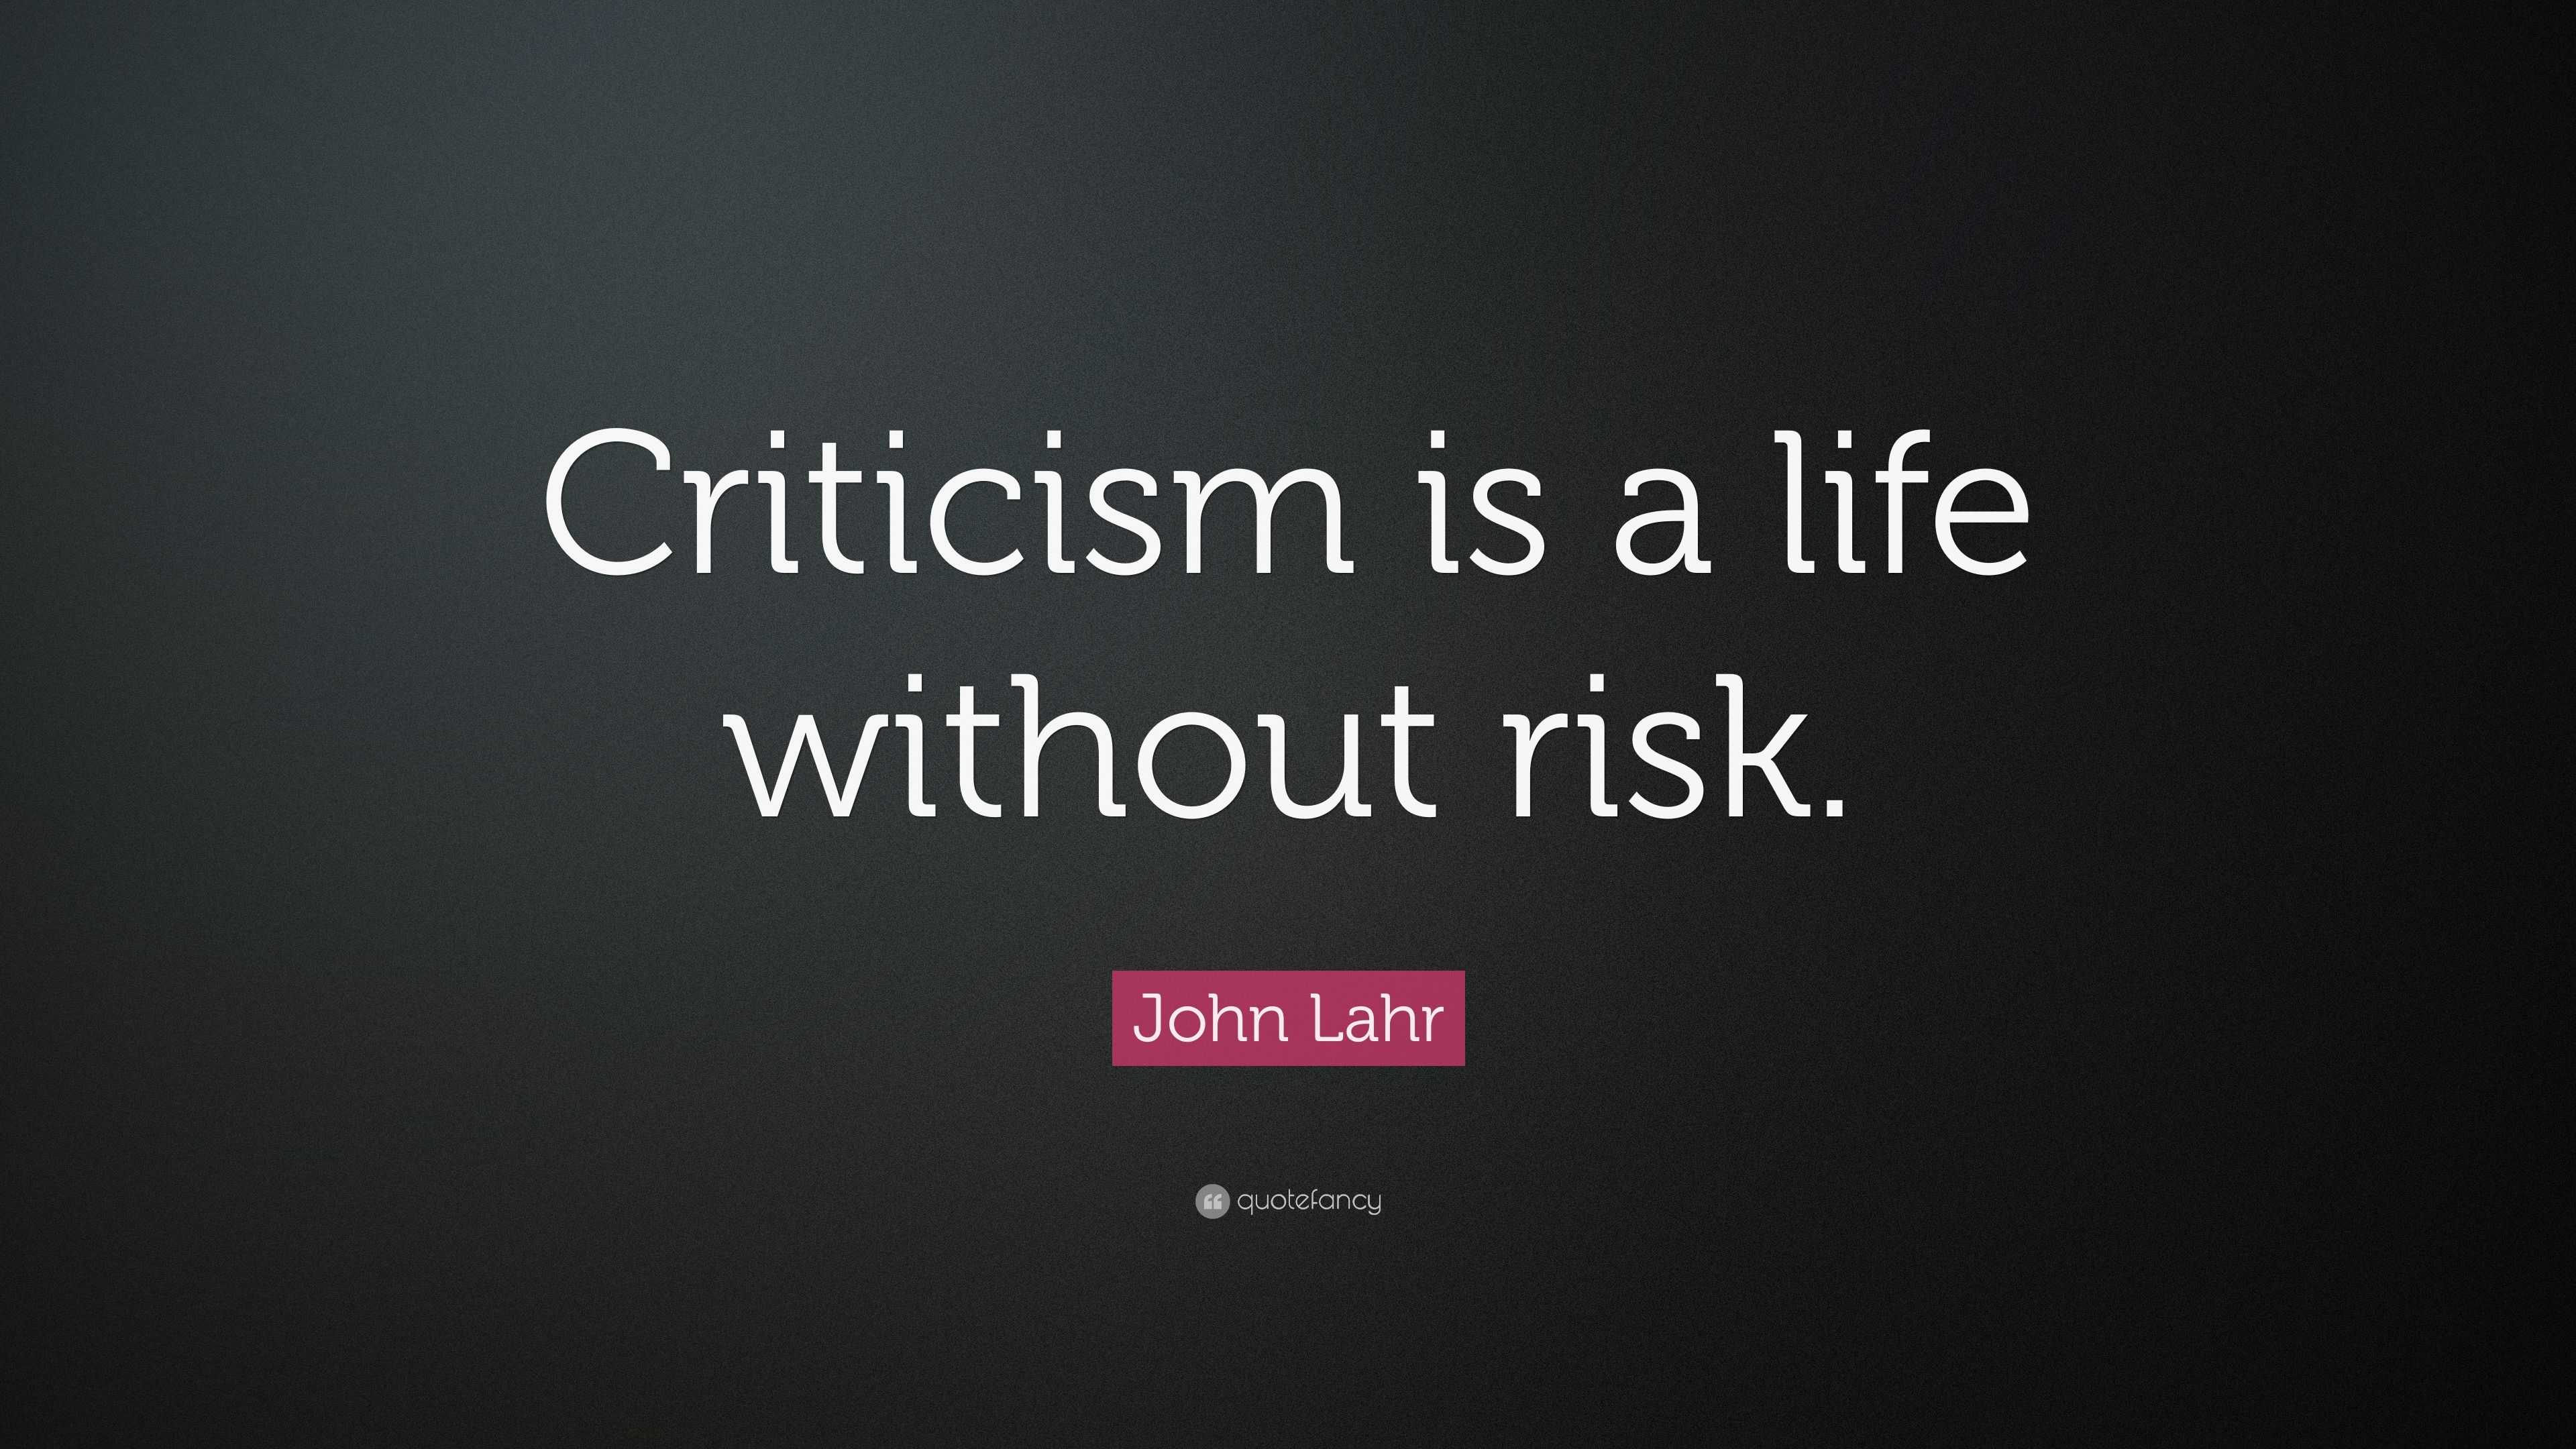 John Lahr Quote “Criticism is a life without risk ”